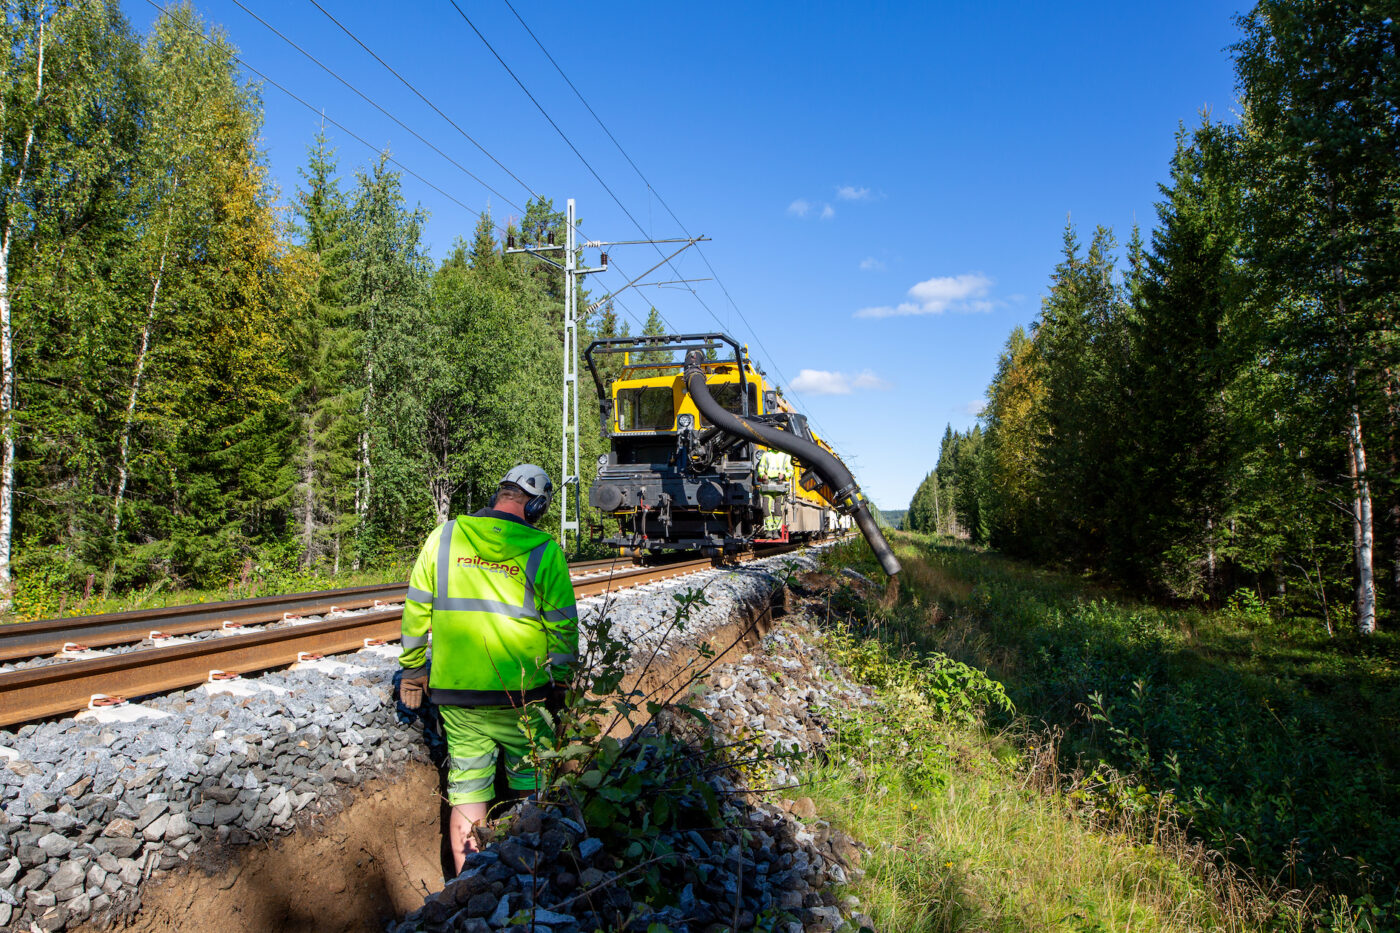 Railways in the north of Sweden are being upgraded, with battery-powered maintenance machines